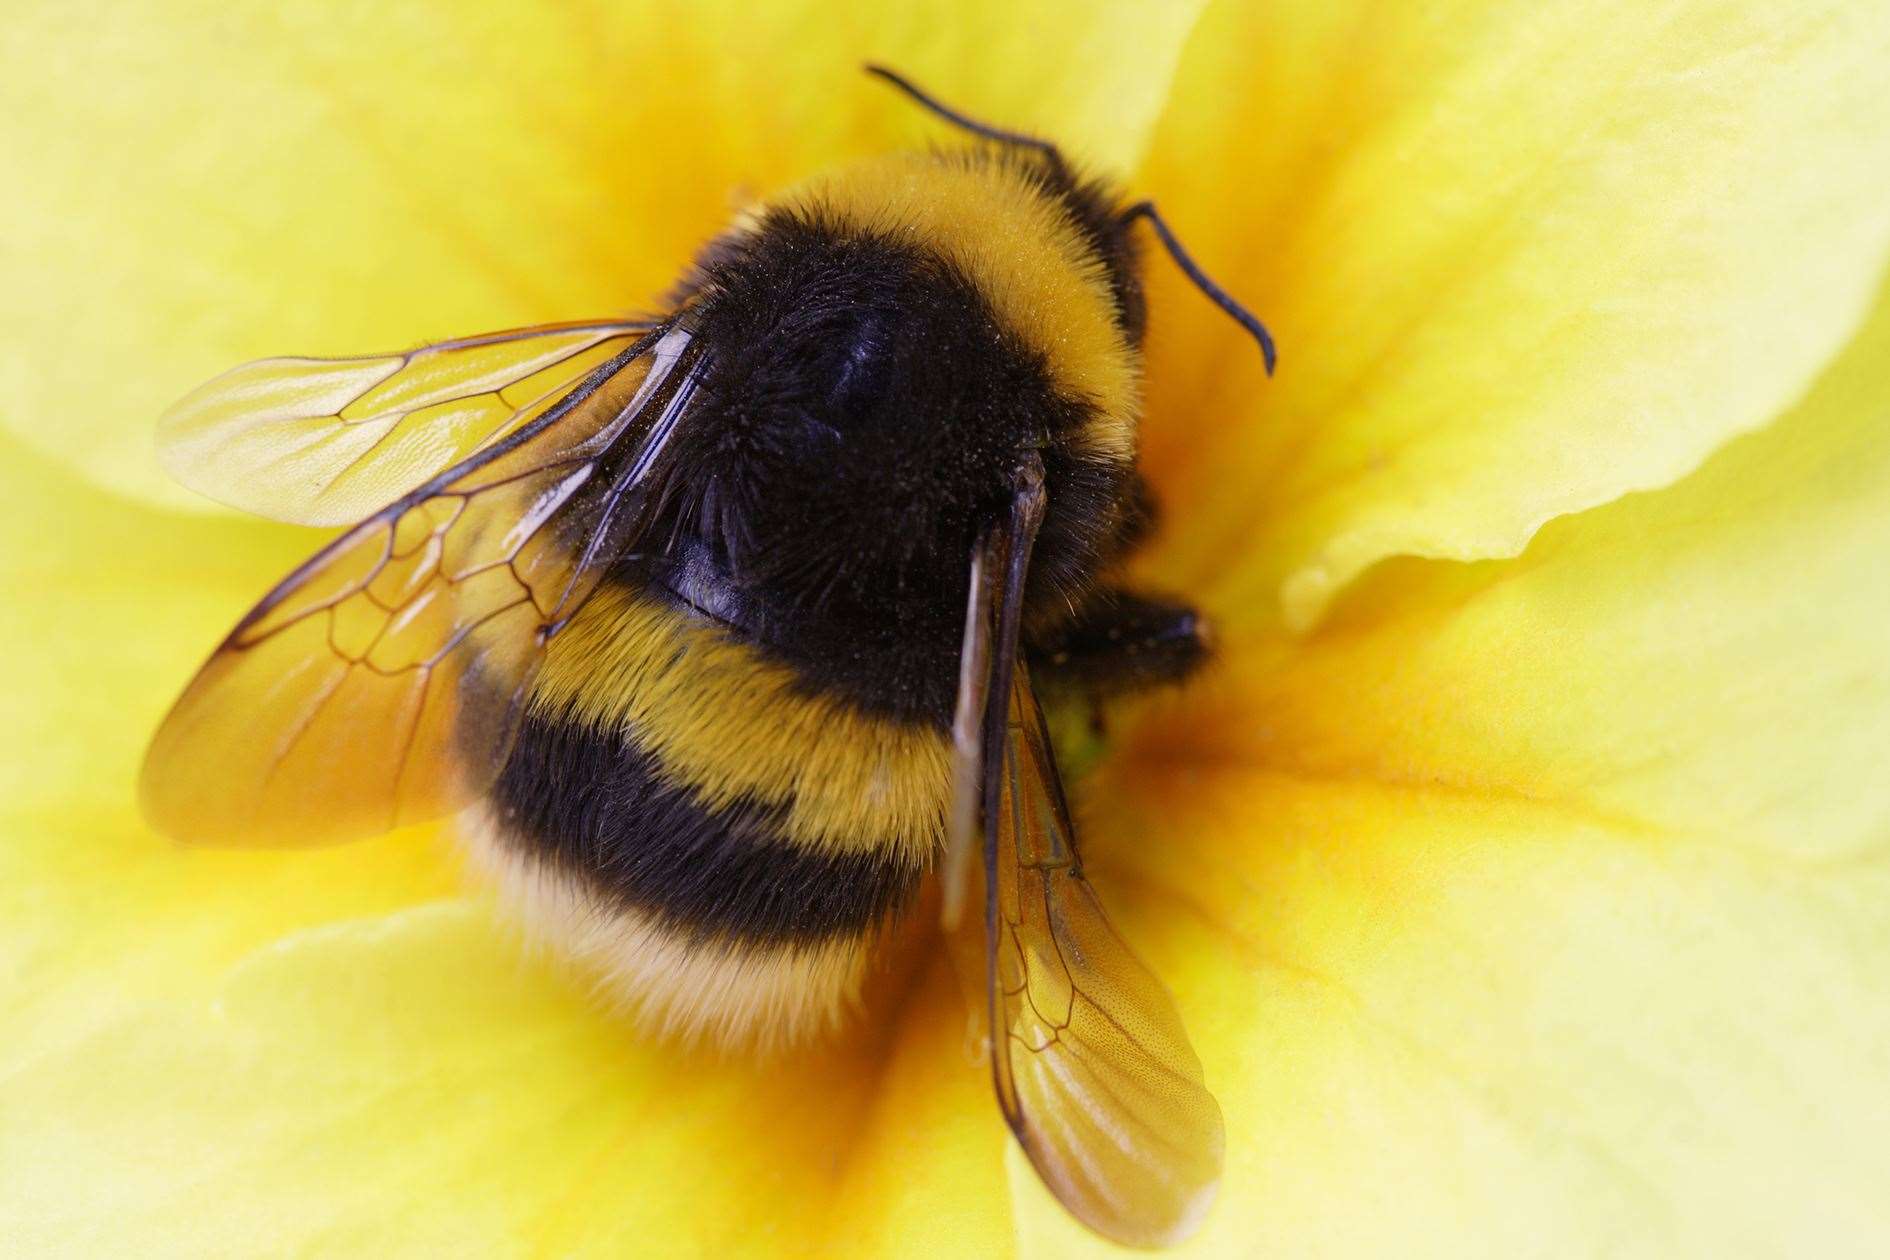 Find out more about bees with the Simpsons project.